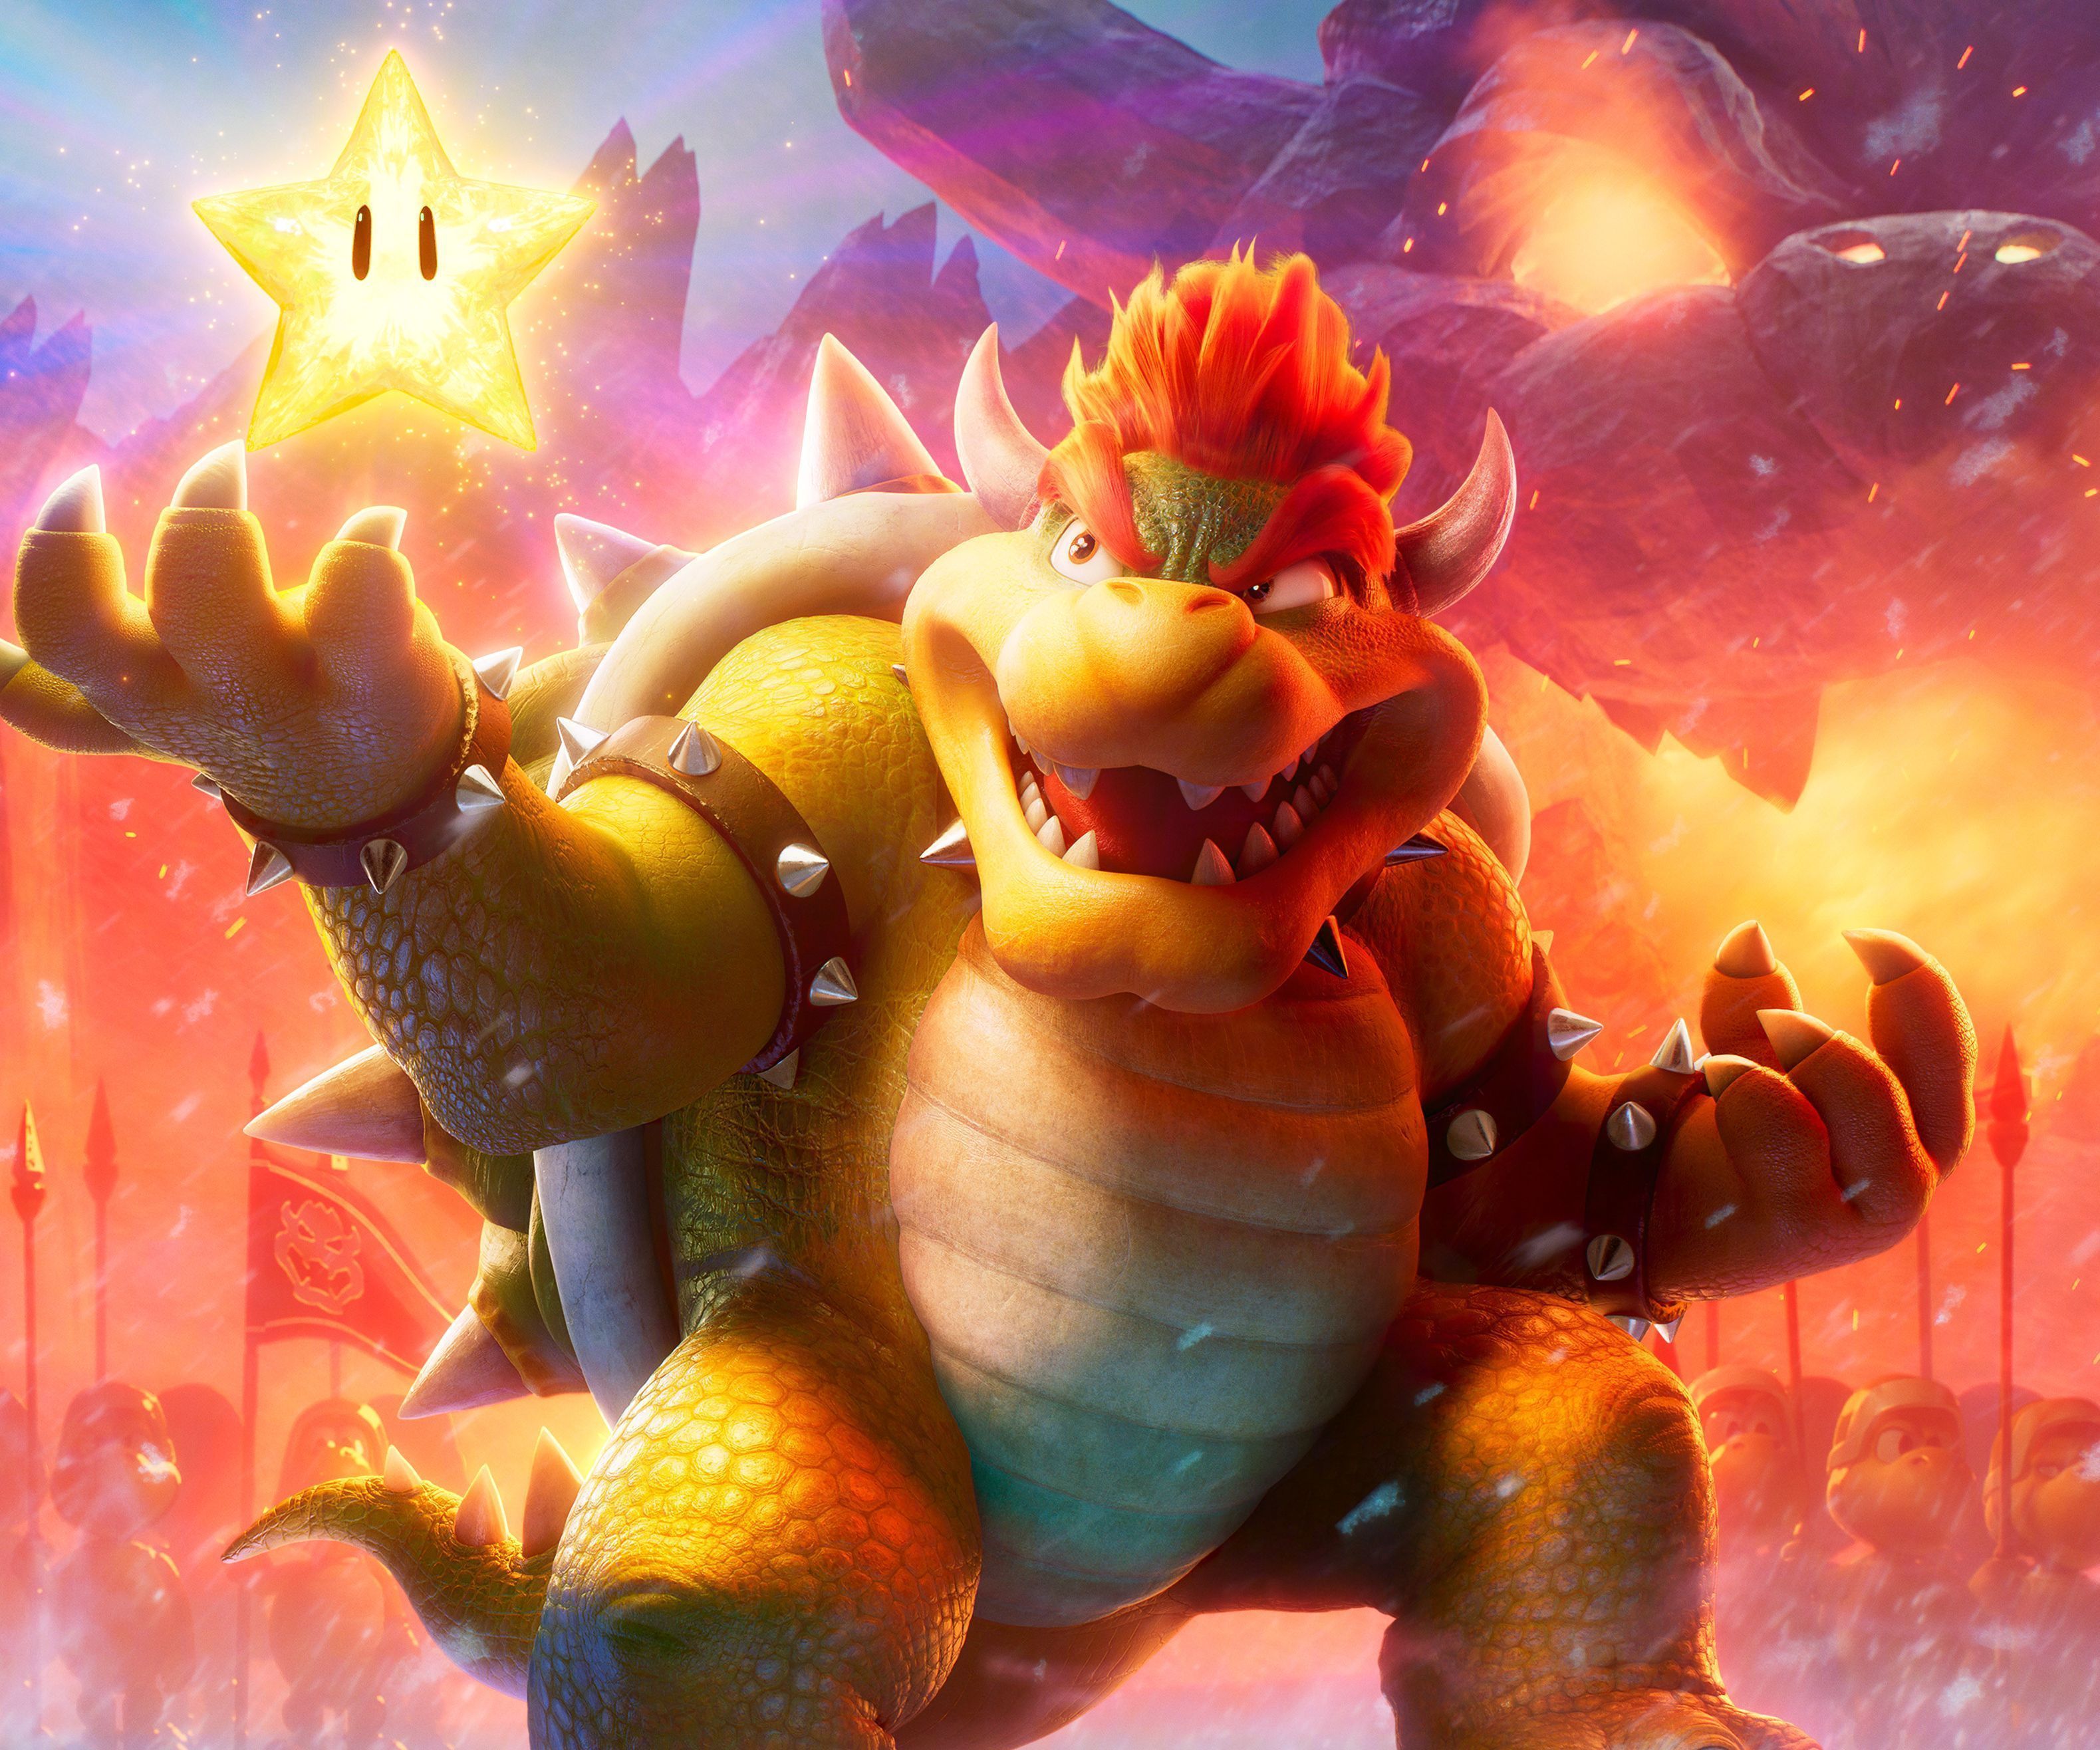 Mario 3D World + Bowser's Fury is a fun game that's only made better by its predecessor. - Bowser